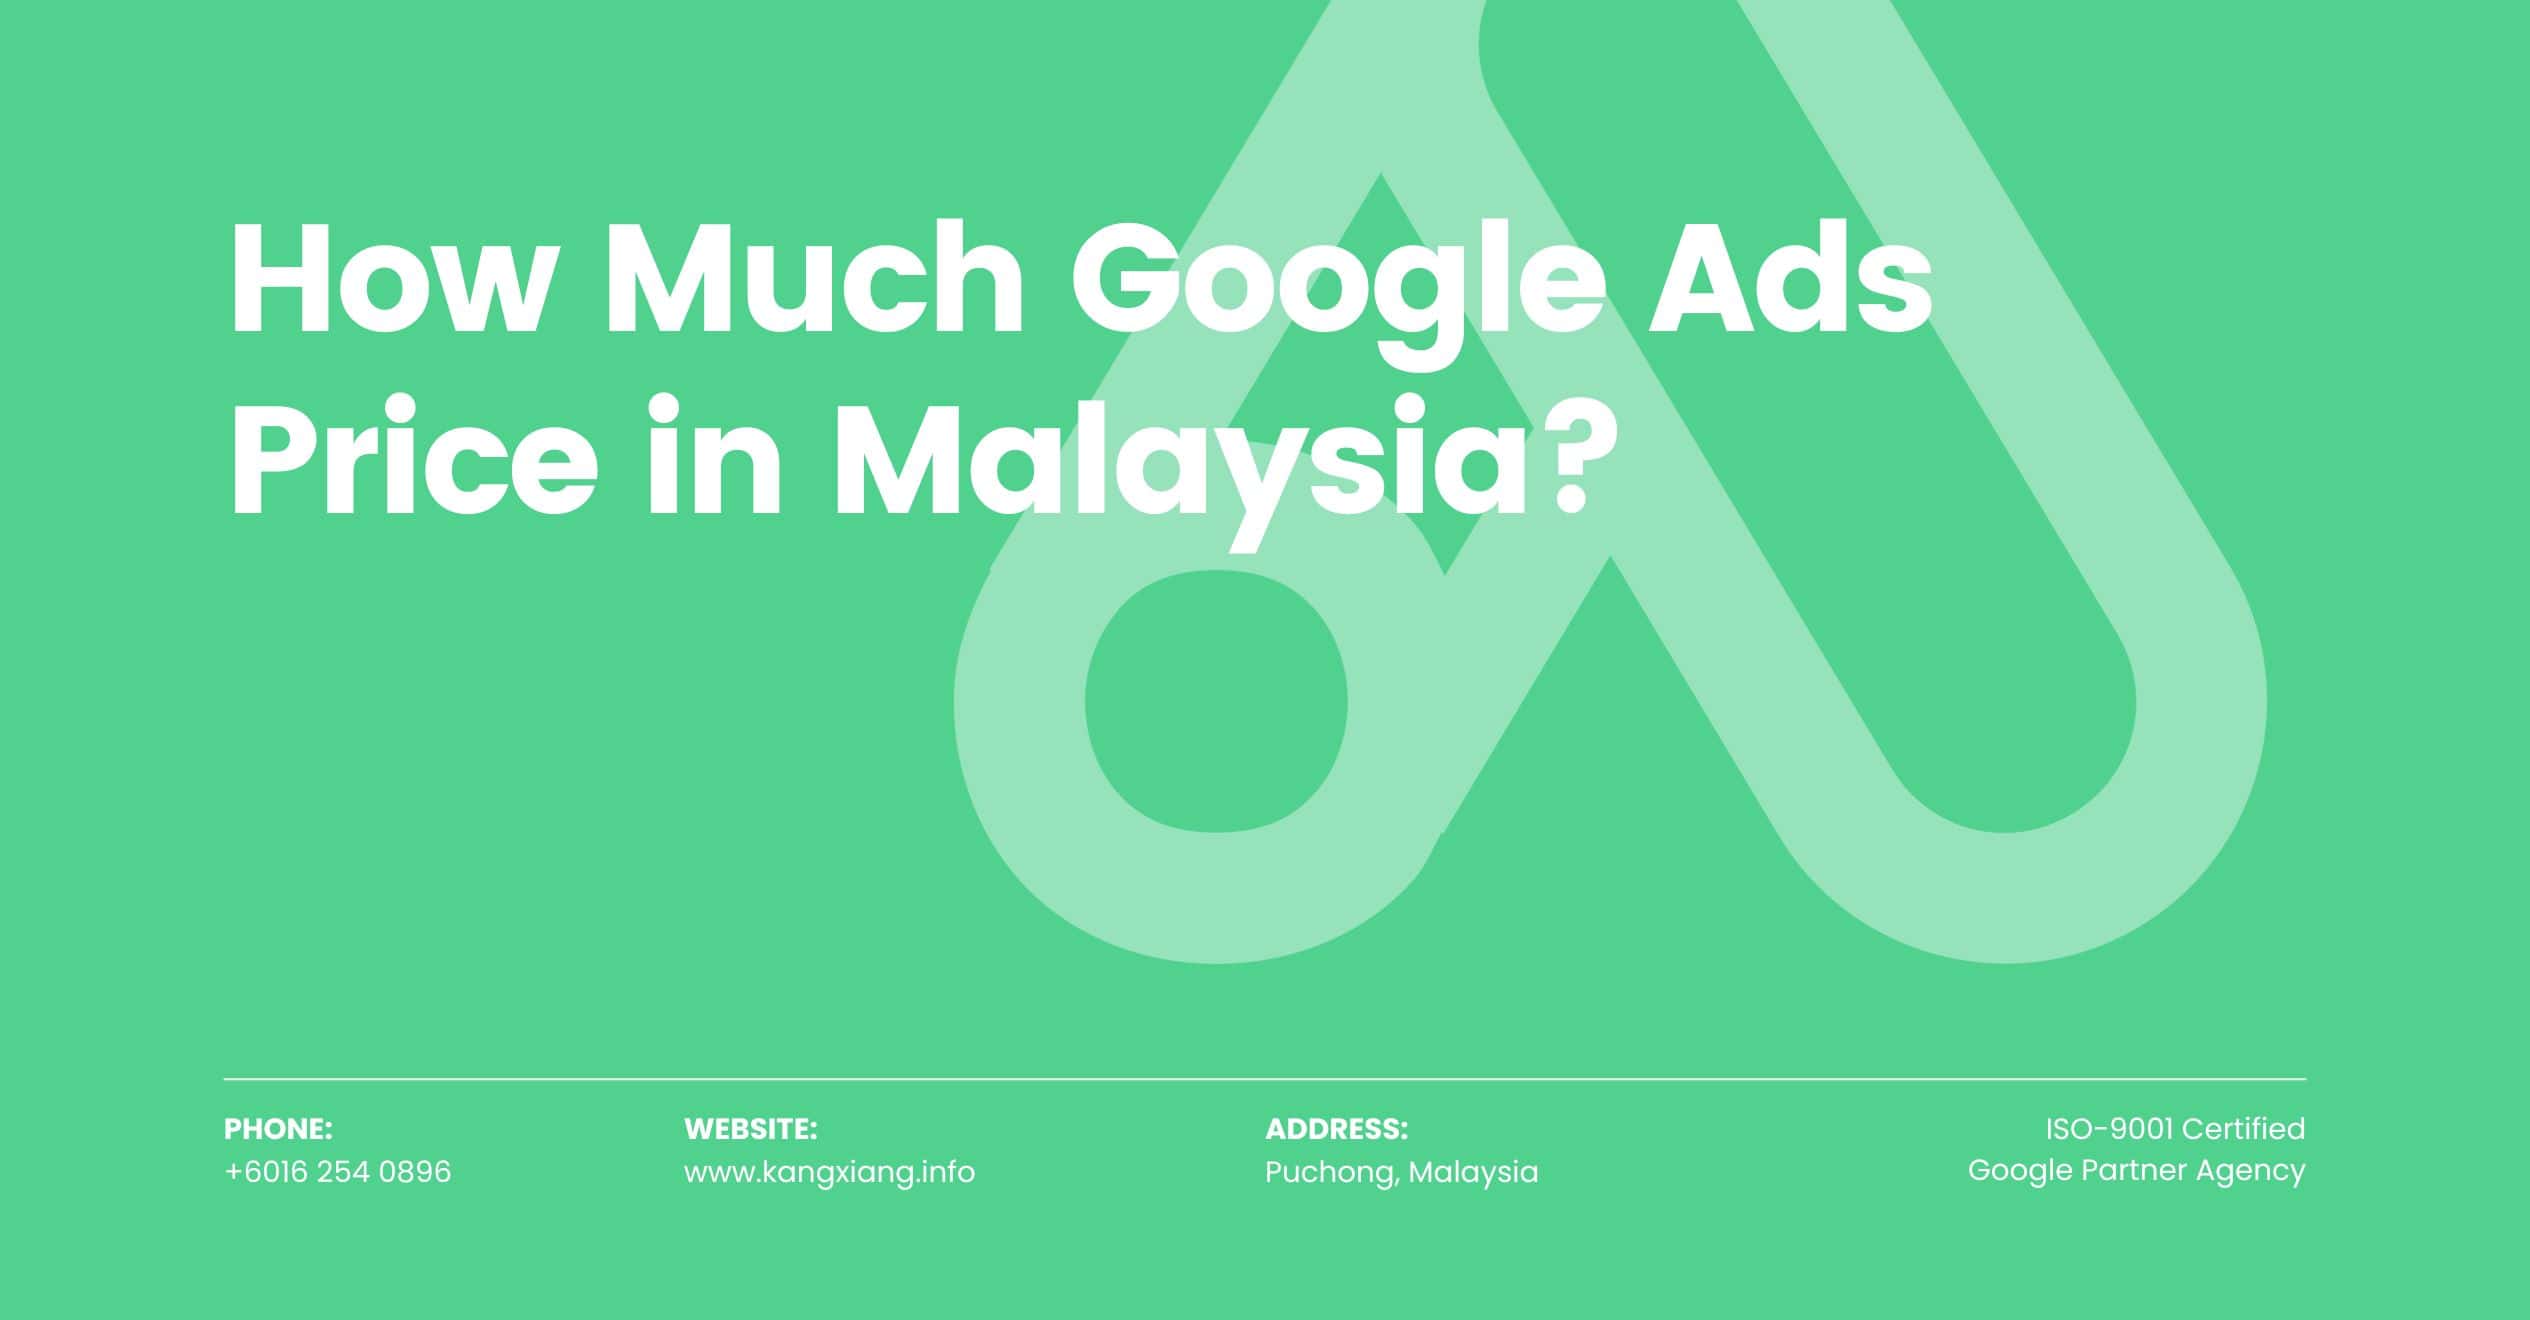 How Much Google Ads Price in Malaysia